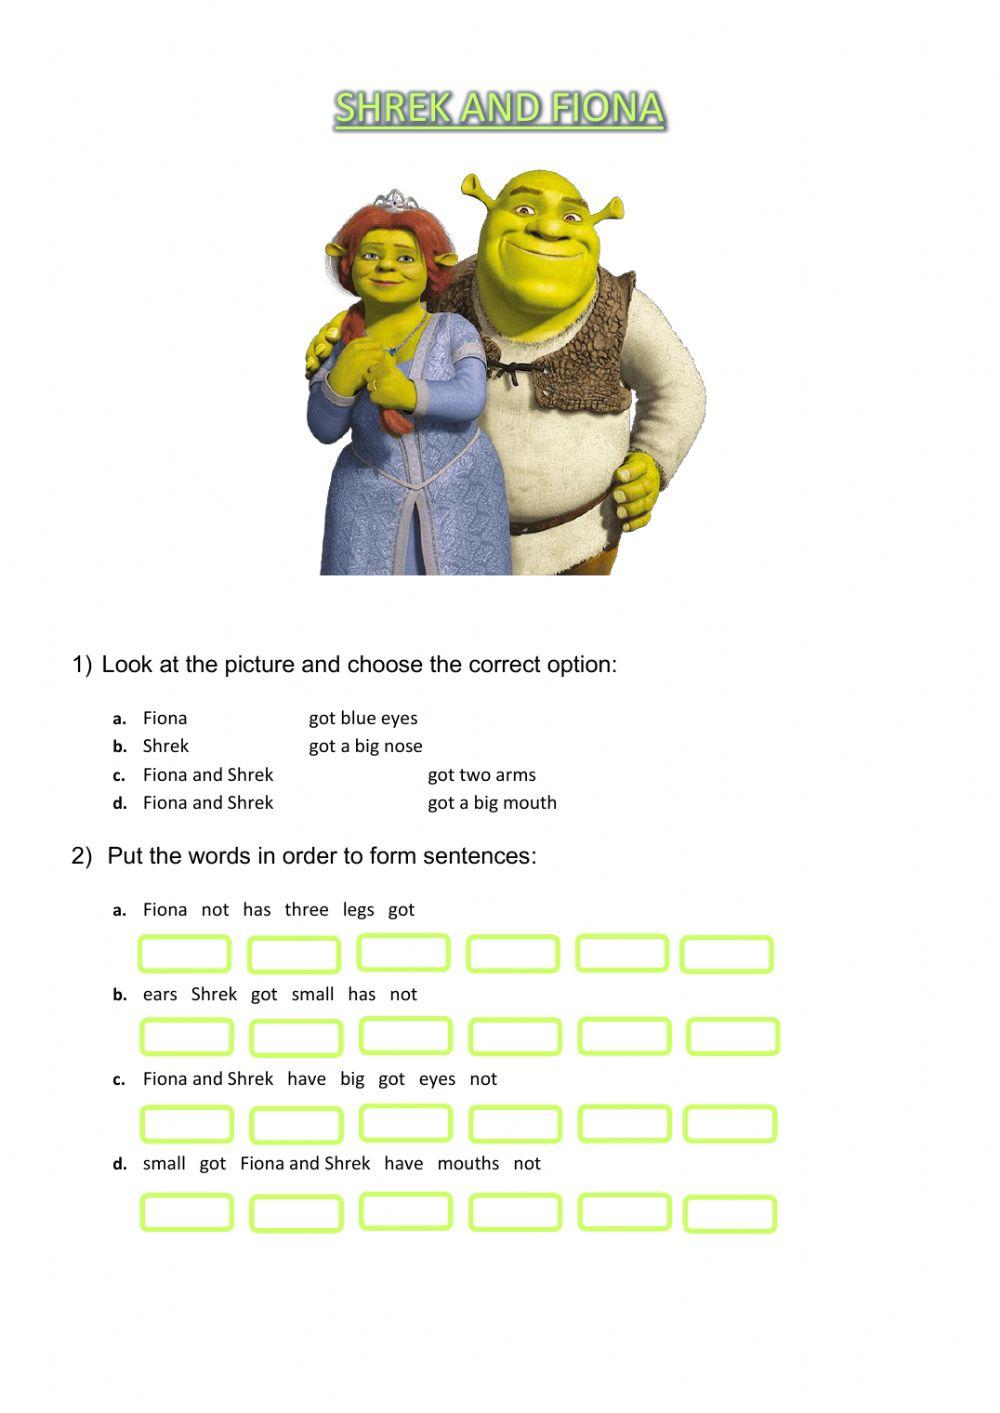 Shrek and Fiona - Have-has got